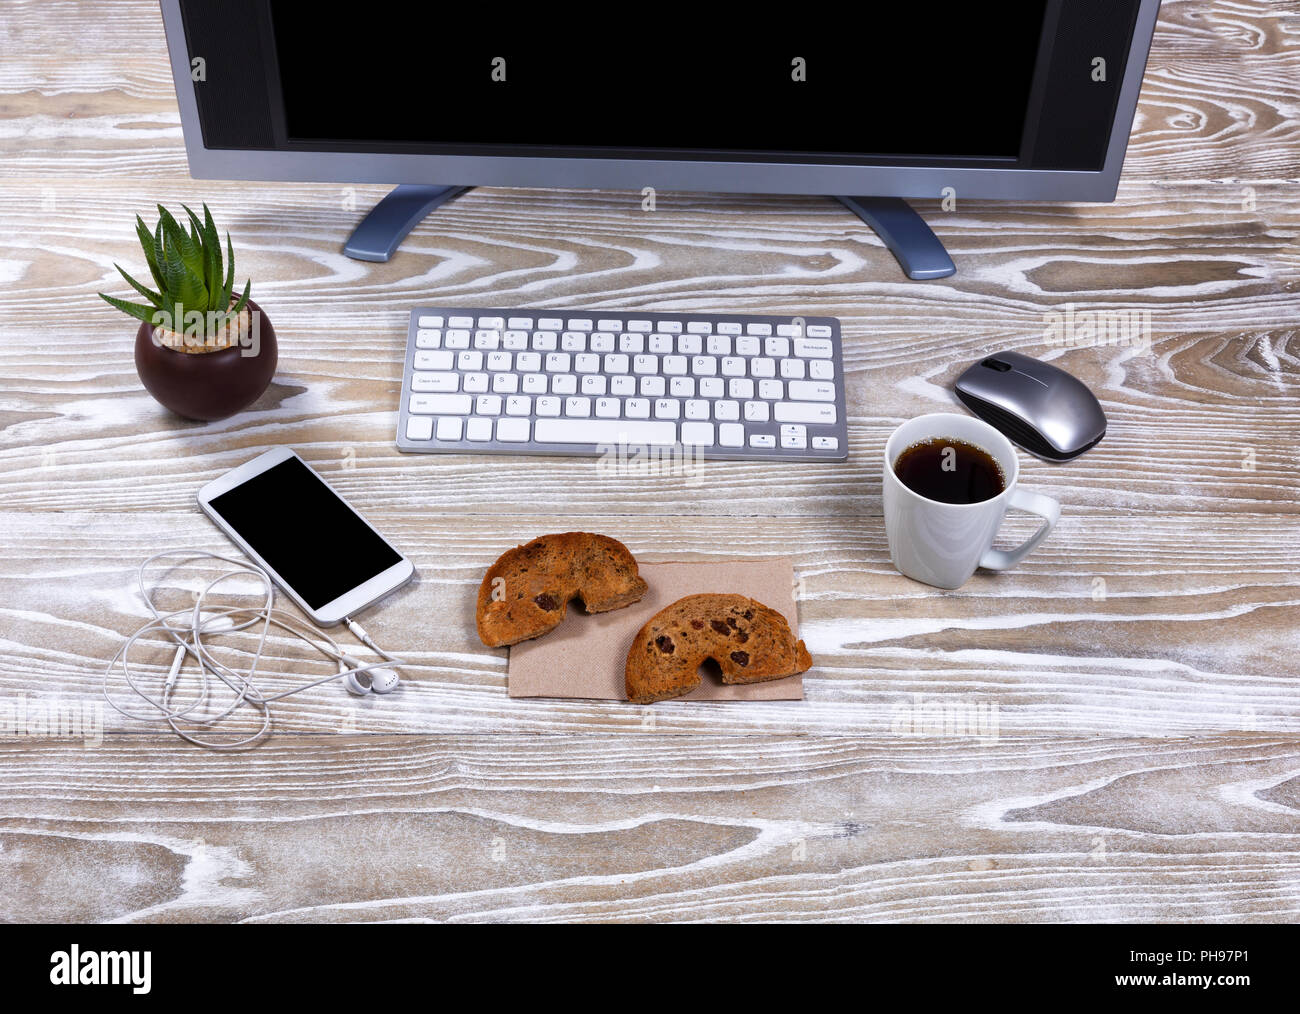 Toasted bagel and dark coffee on working desktop Stock Photo